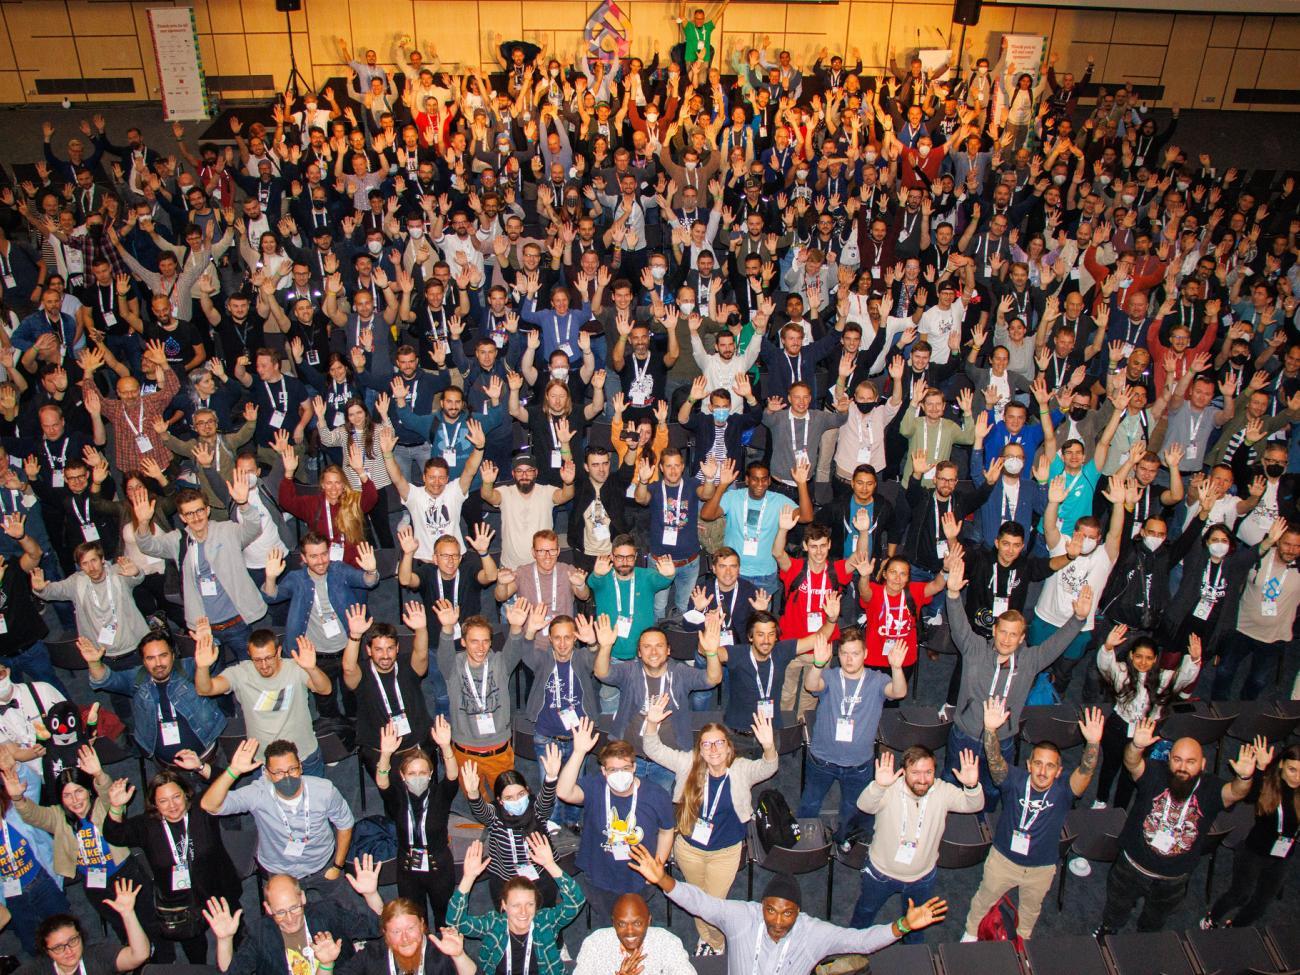 DrupalCon 2023 will again bring together Drupal enthusiasts, users and developers at the conference.